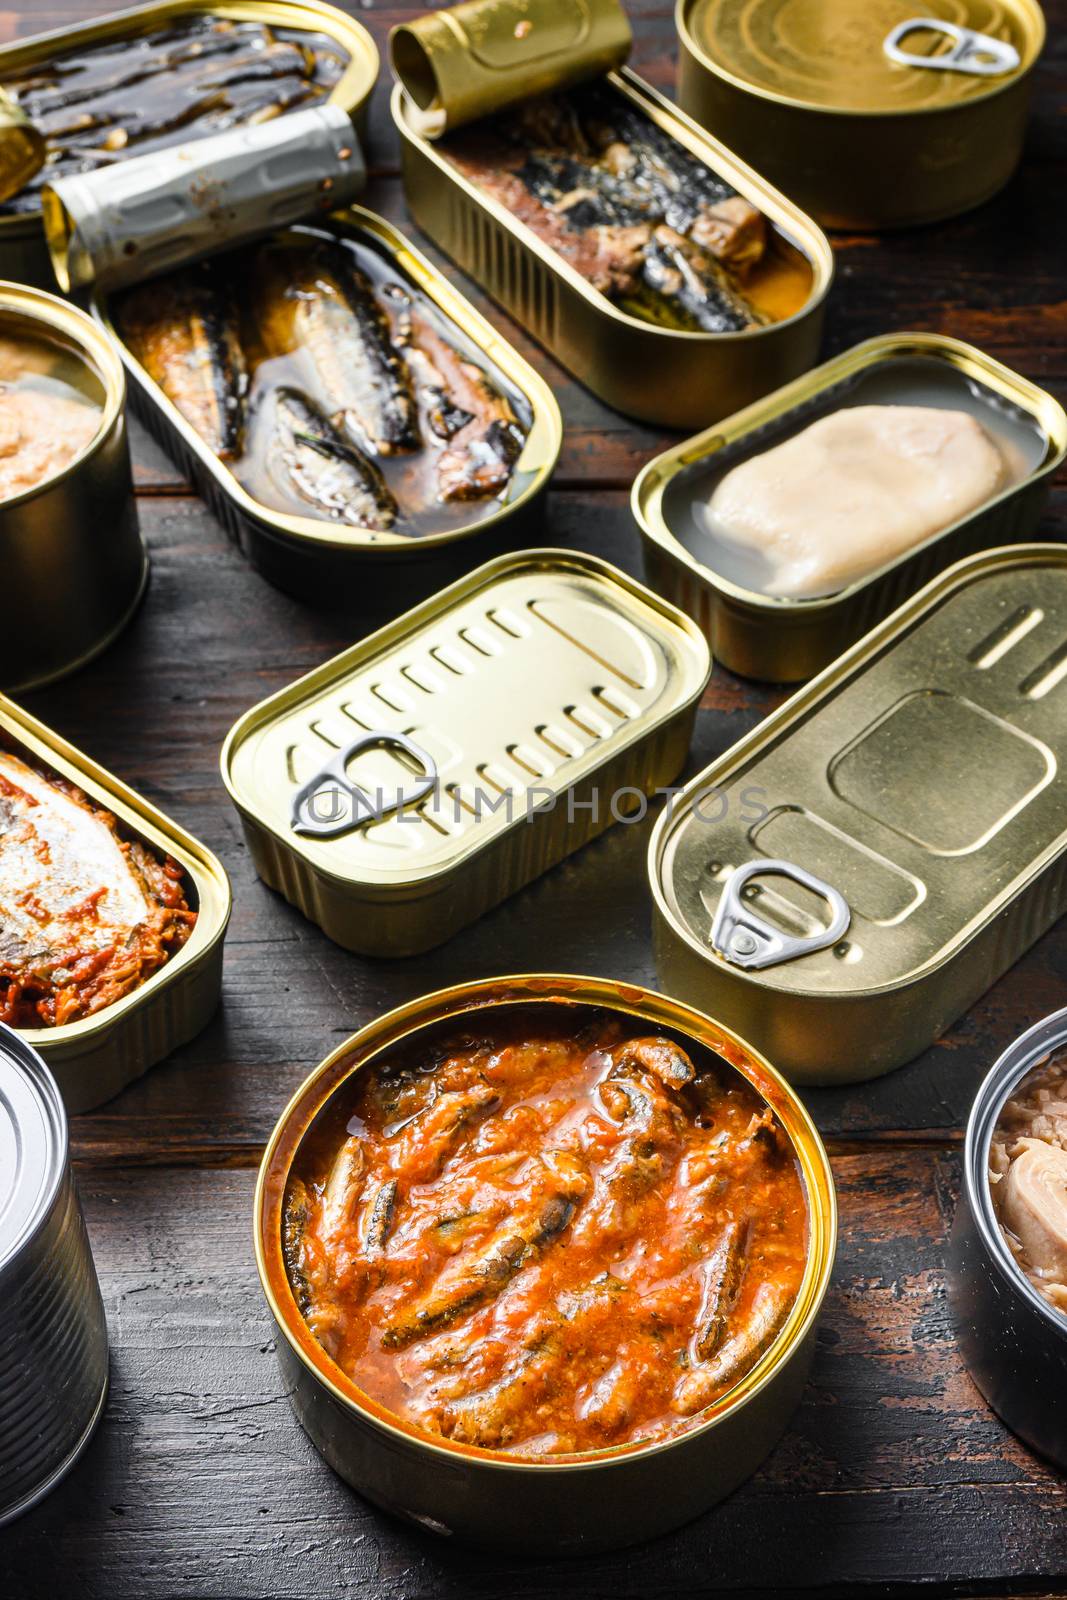 Conserves of canned fish with different types of seafood, opened and closed cans with Saury, mackerel, sprats, sardines, pilchard, squid, tuna, over dark wood old table side view, vertical by Ilianesolenyi